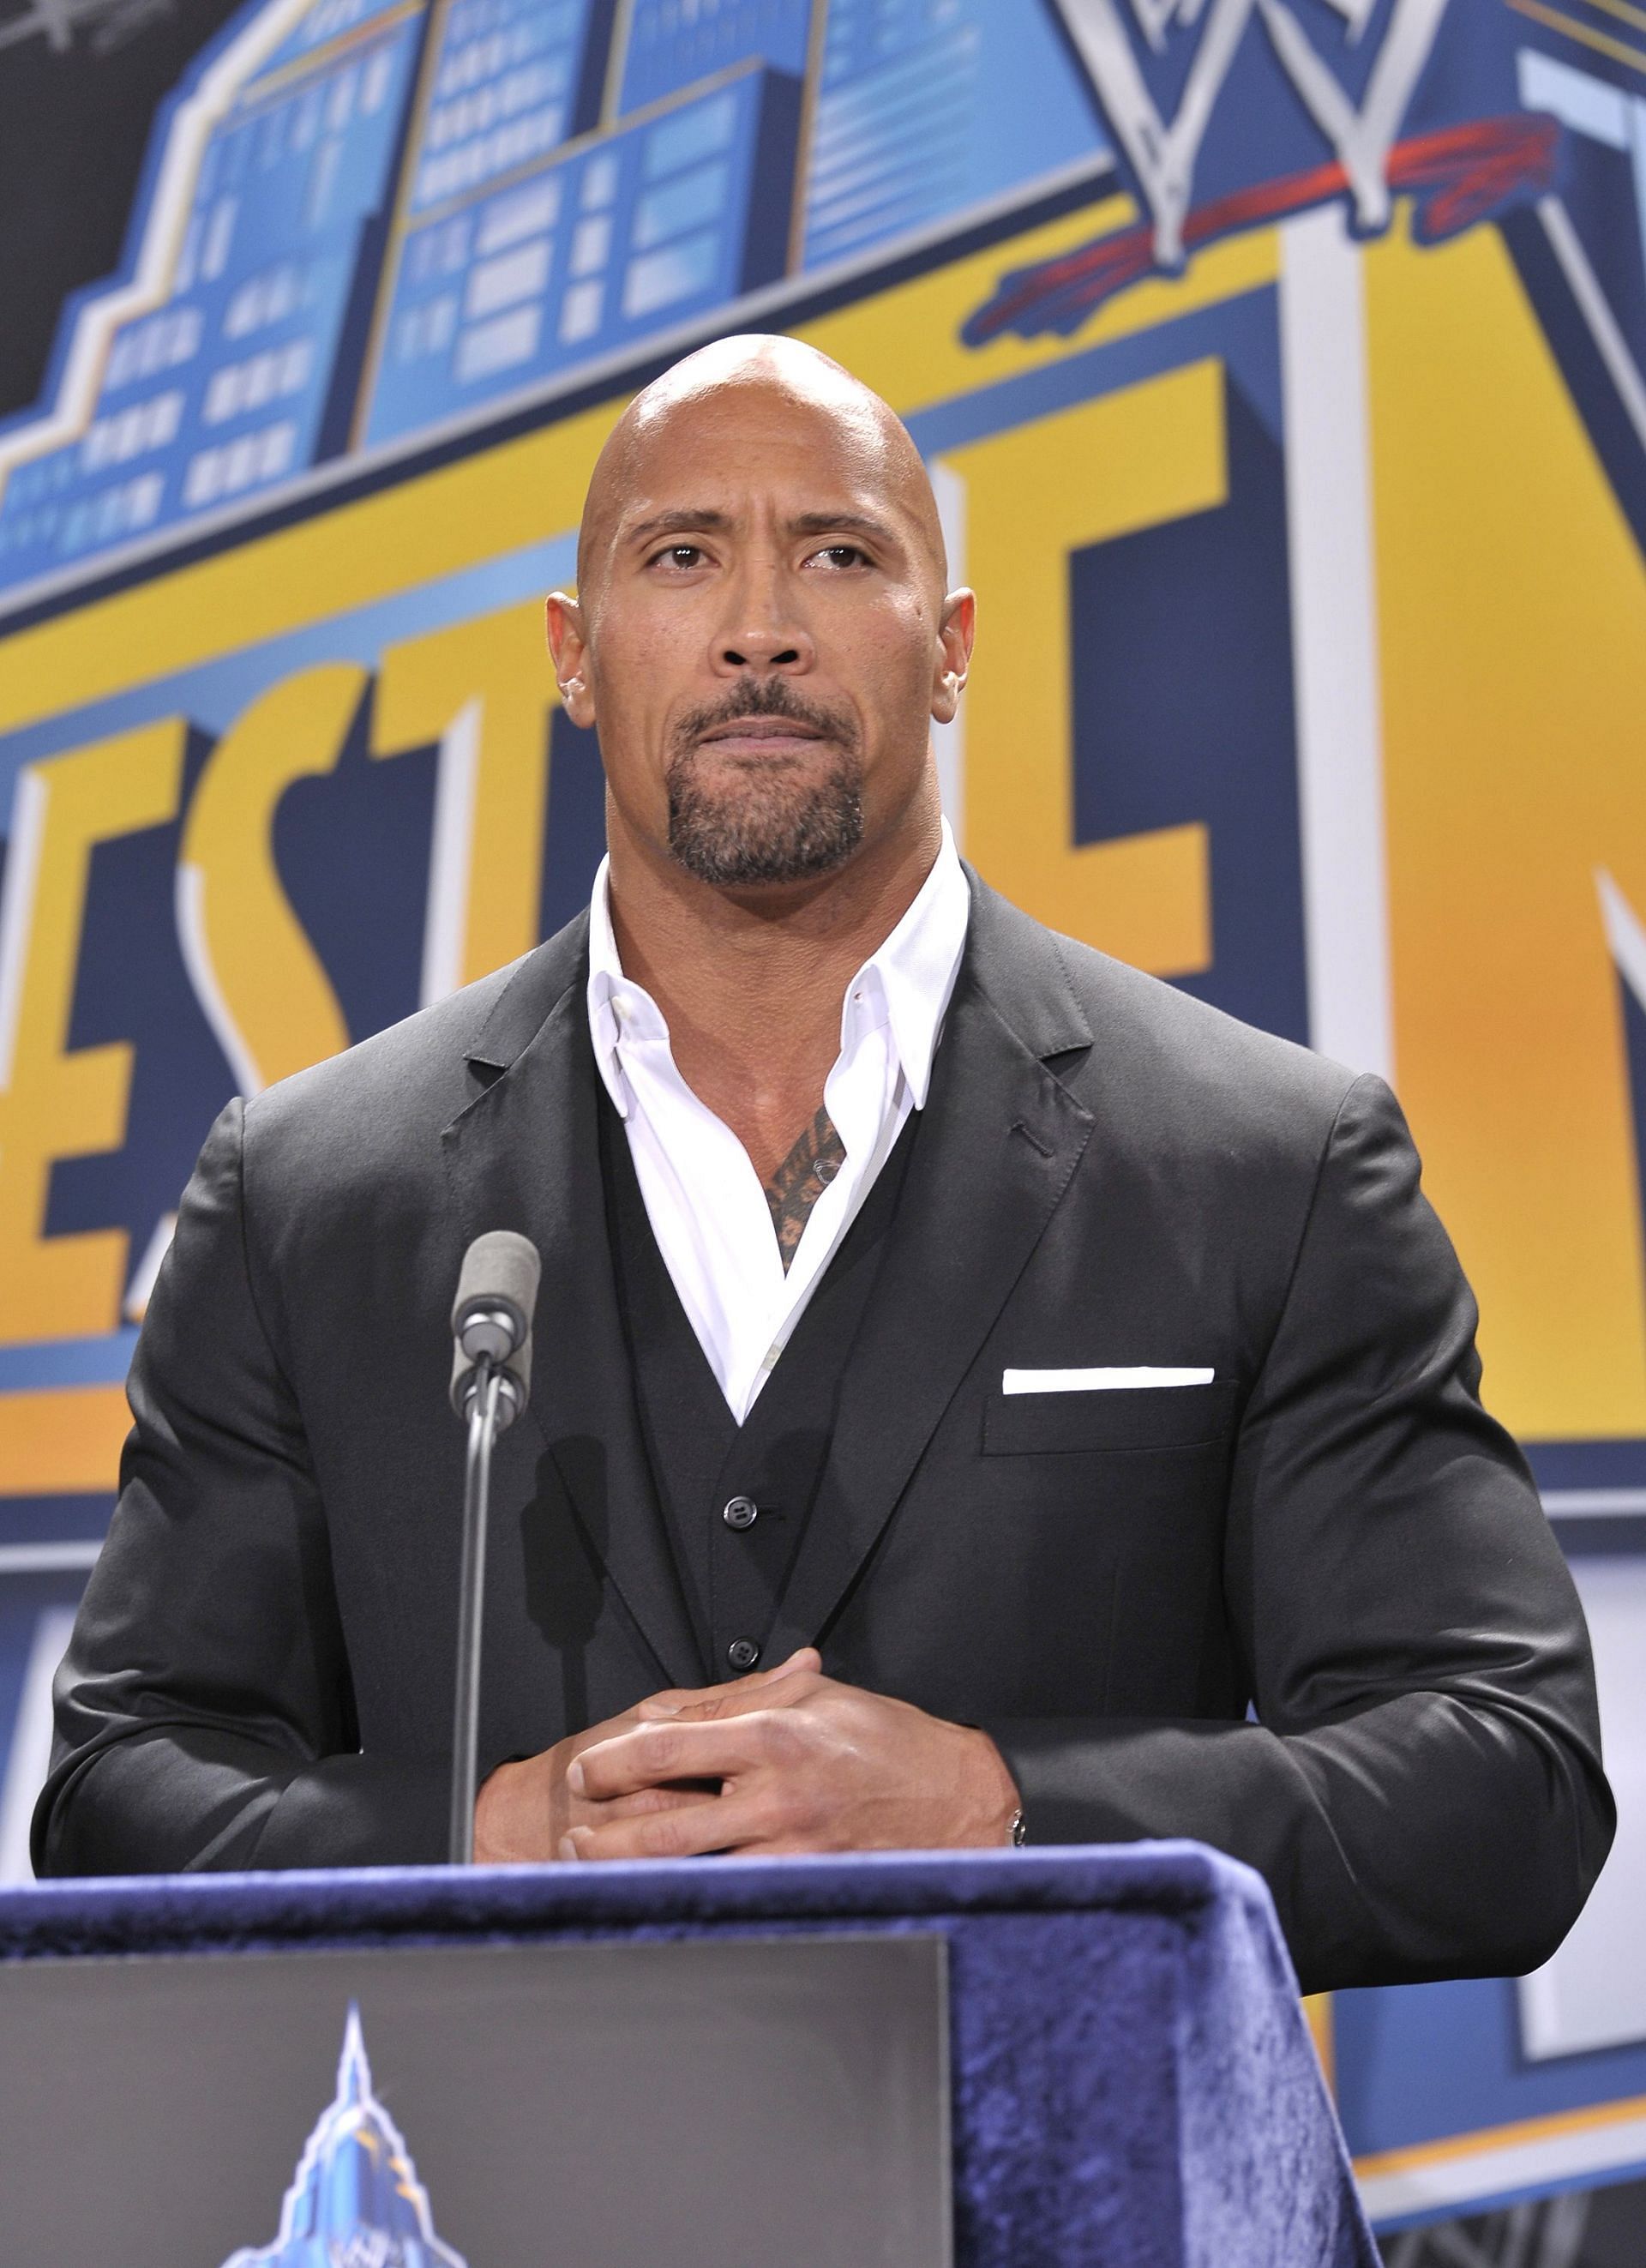 The Rock during a WWE event